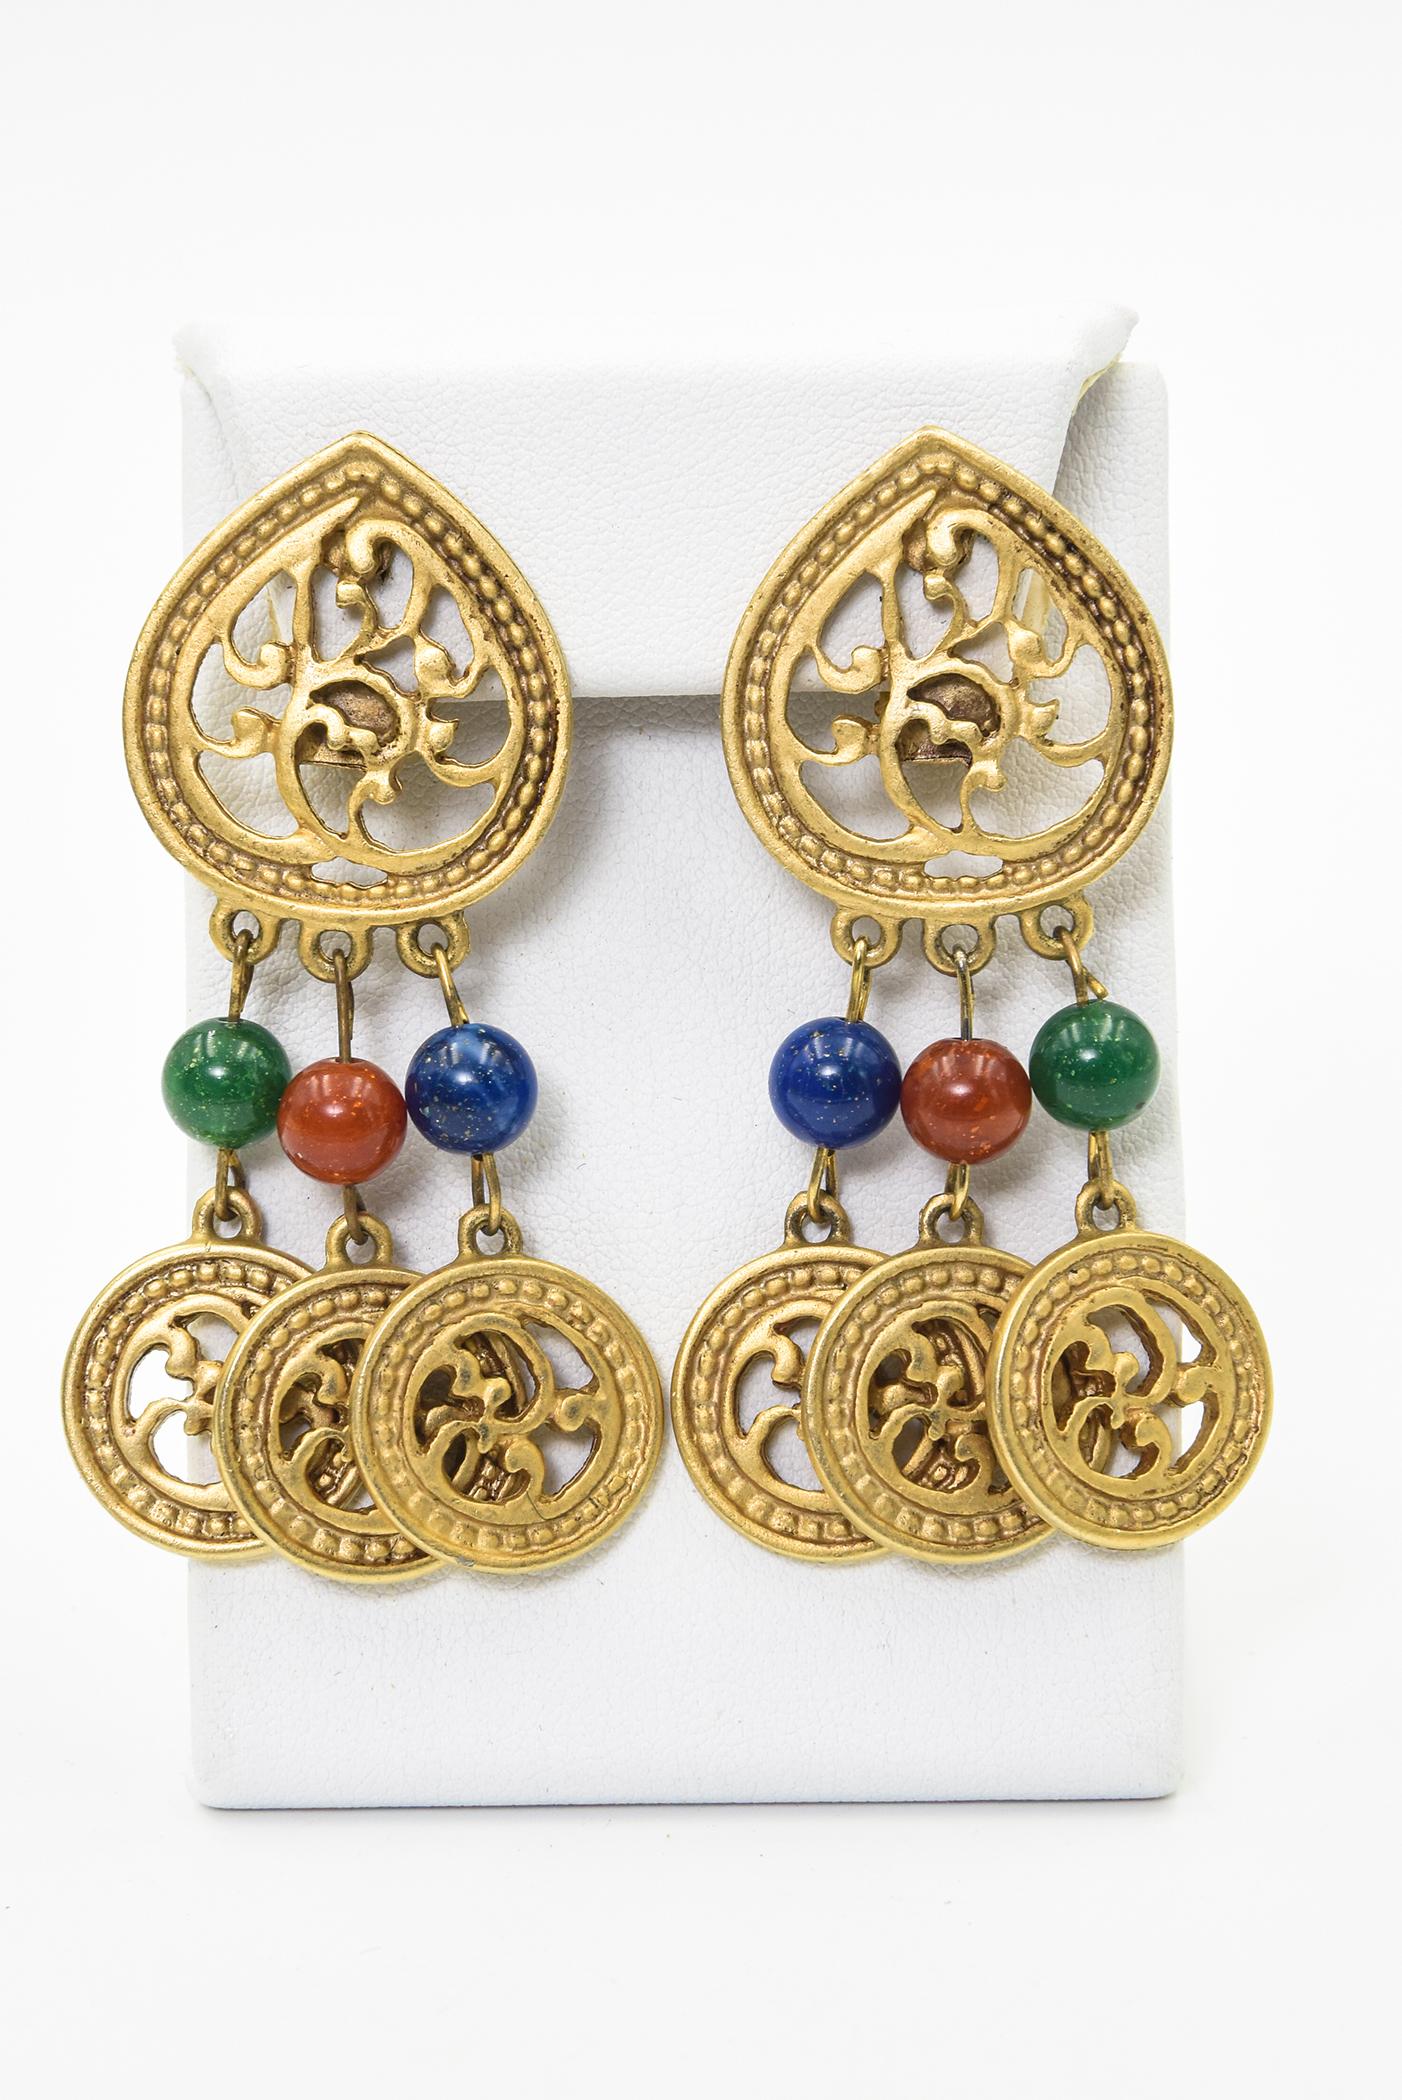 Dramatic gold toned drop earring with punched out teardrop design on the ear which is repeated with 3 similar  round dangles.  The dangles drop from a green, orange and blue glass bead.  They are clip-on so no piercing required.  They have no makers